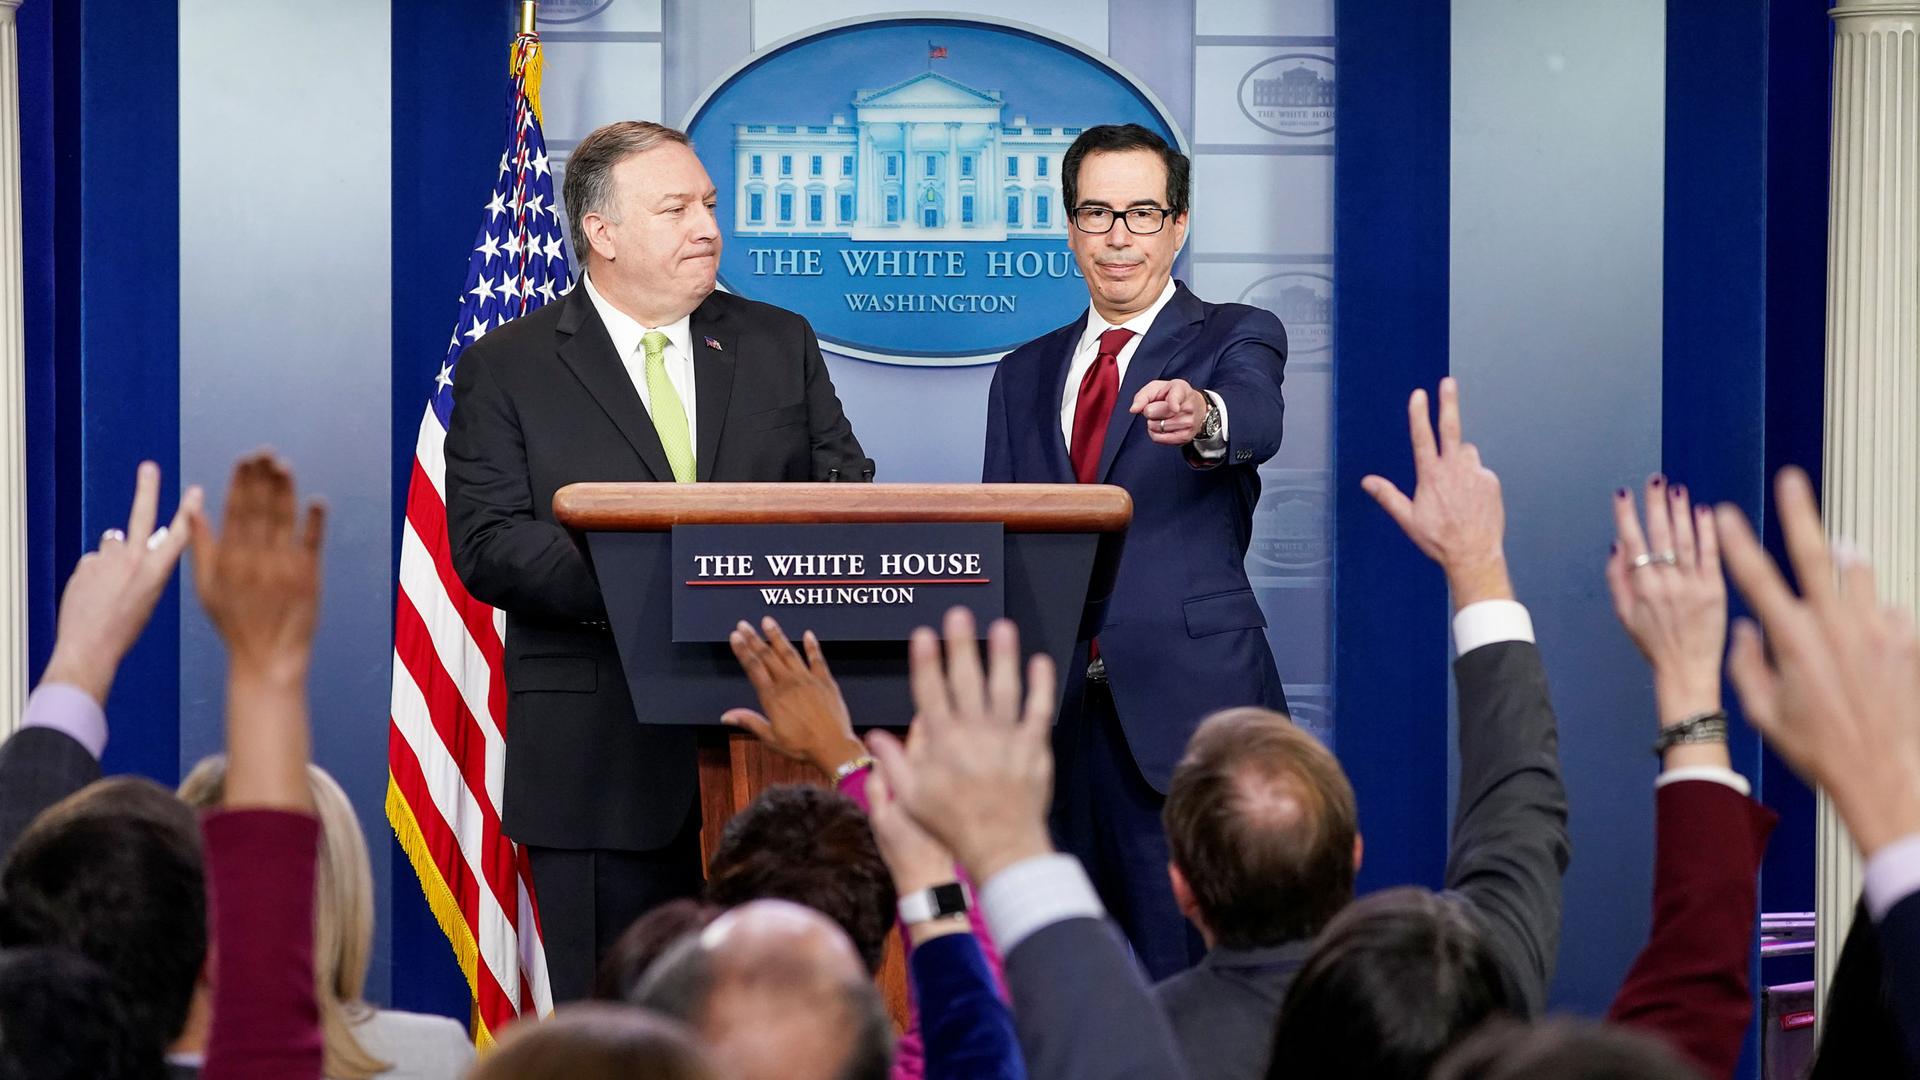 US Secretary of State Mike Pompeo and Treasury Secretary Steven Mnuchin take questions as they announce new sanctions on Iran in the Brady Press Briefing Room of the White House in Washington, DC, on Jan. 10, 2020.